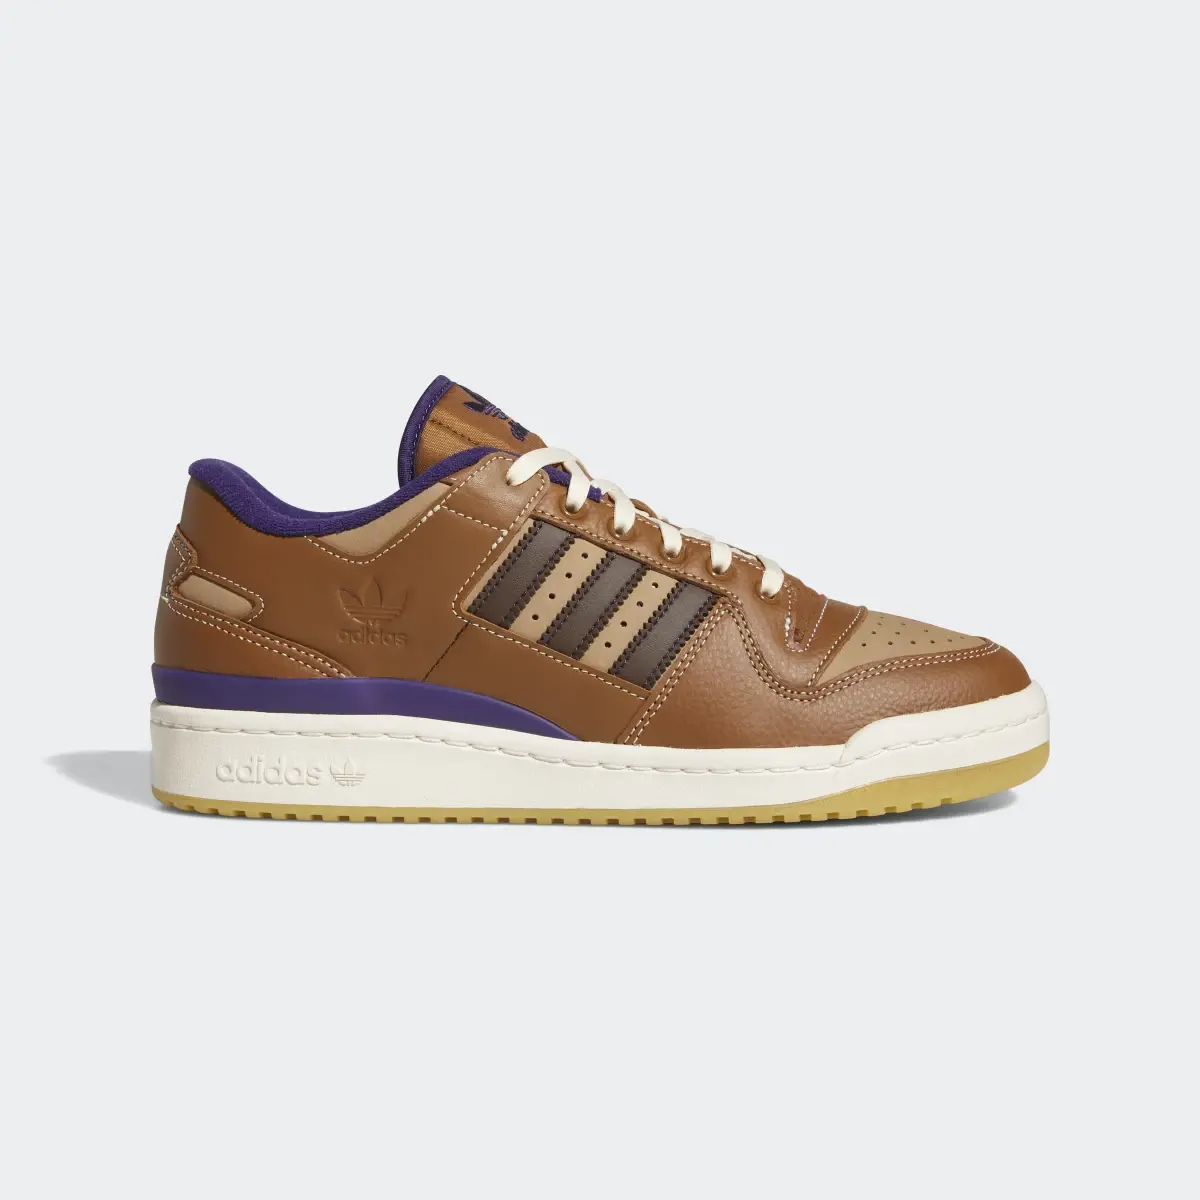 Adidas Heitor Forum 84 Low ADV Shoes. 2